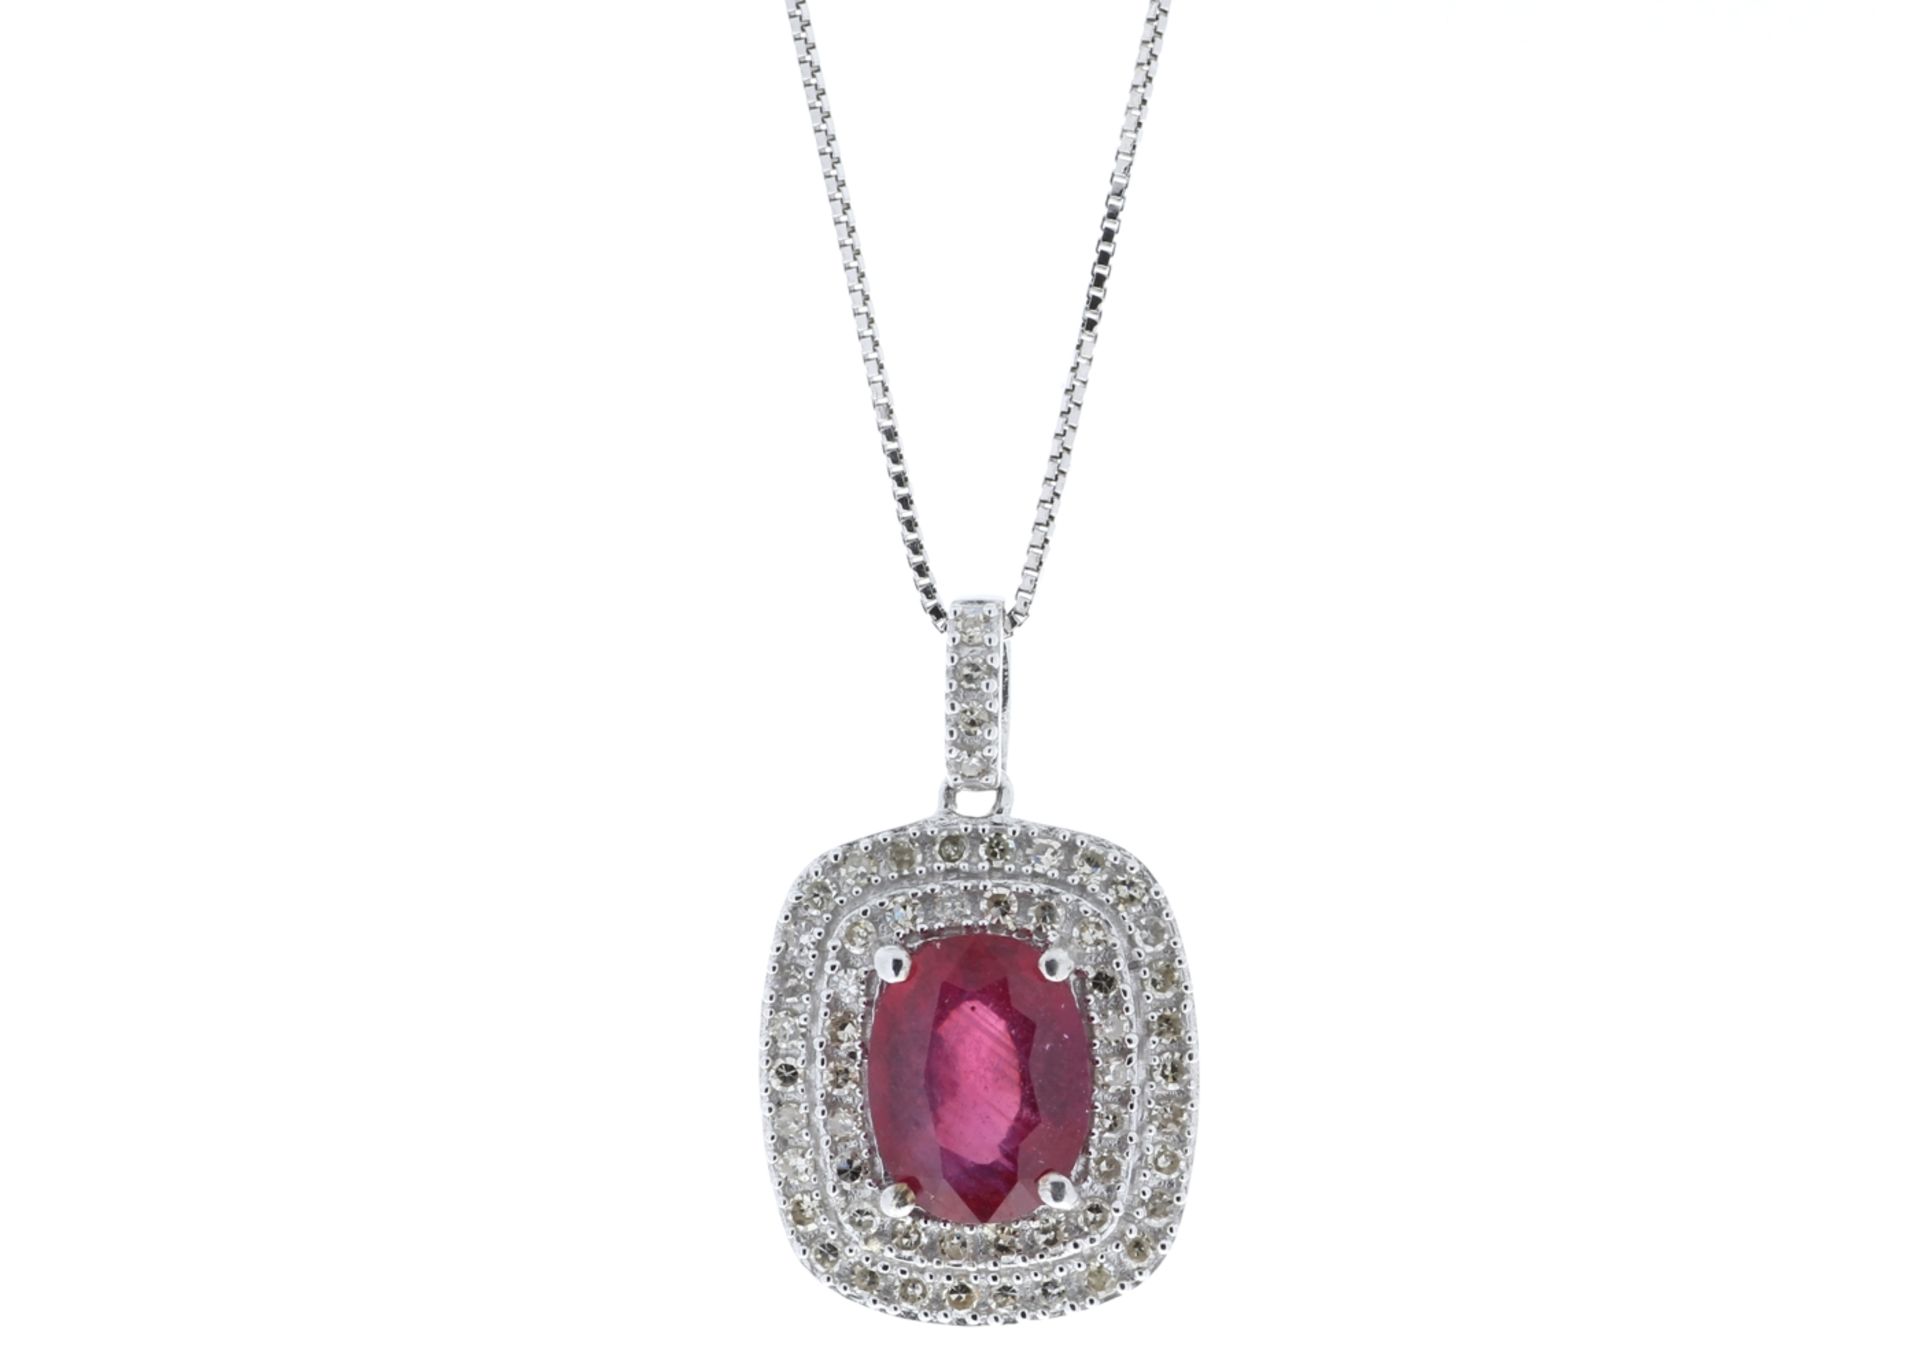 Ruby and diamond pendant set in 14ct gold. Oval cut ruby, 0.70ct, surrounded by brilliant cut